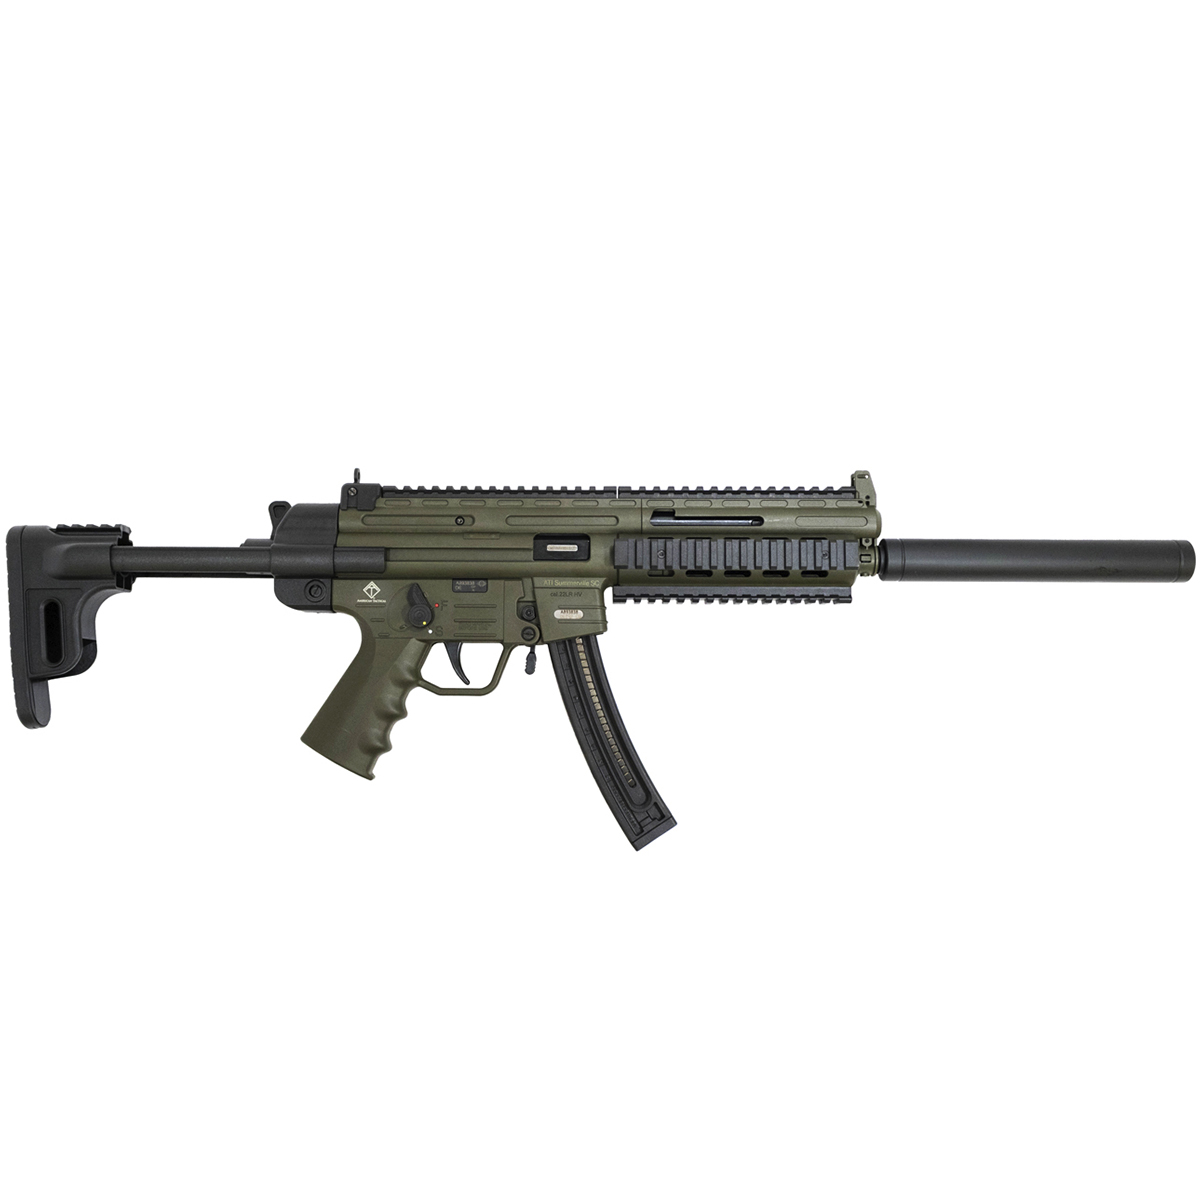 GSG-16 OD Green – Non-Restricted